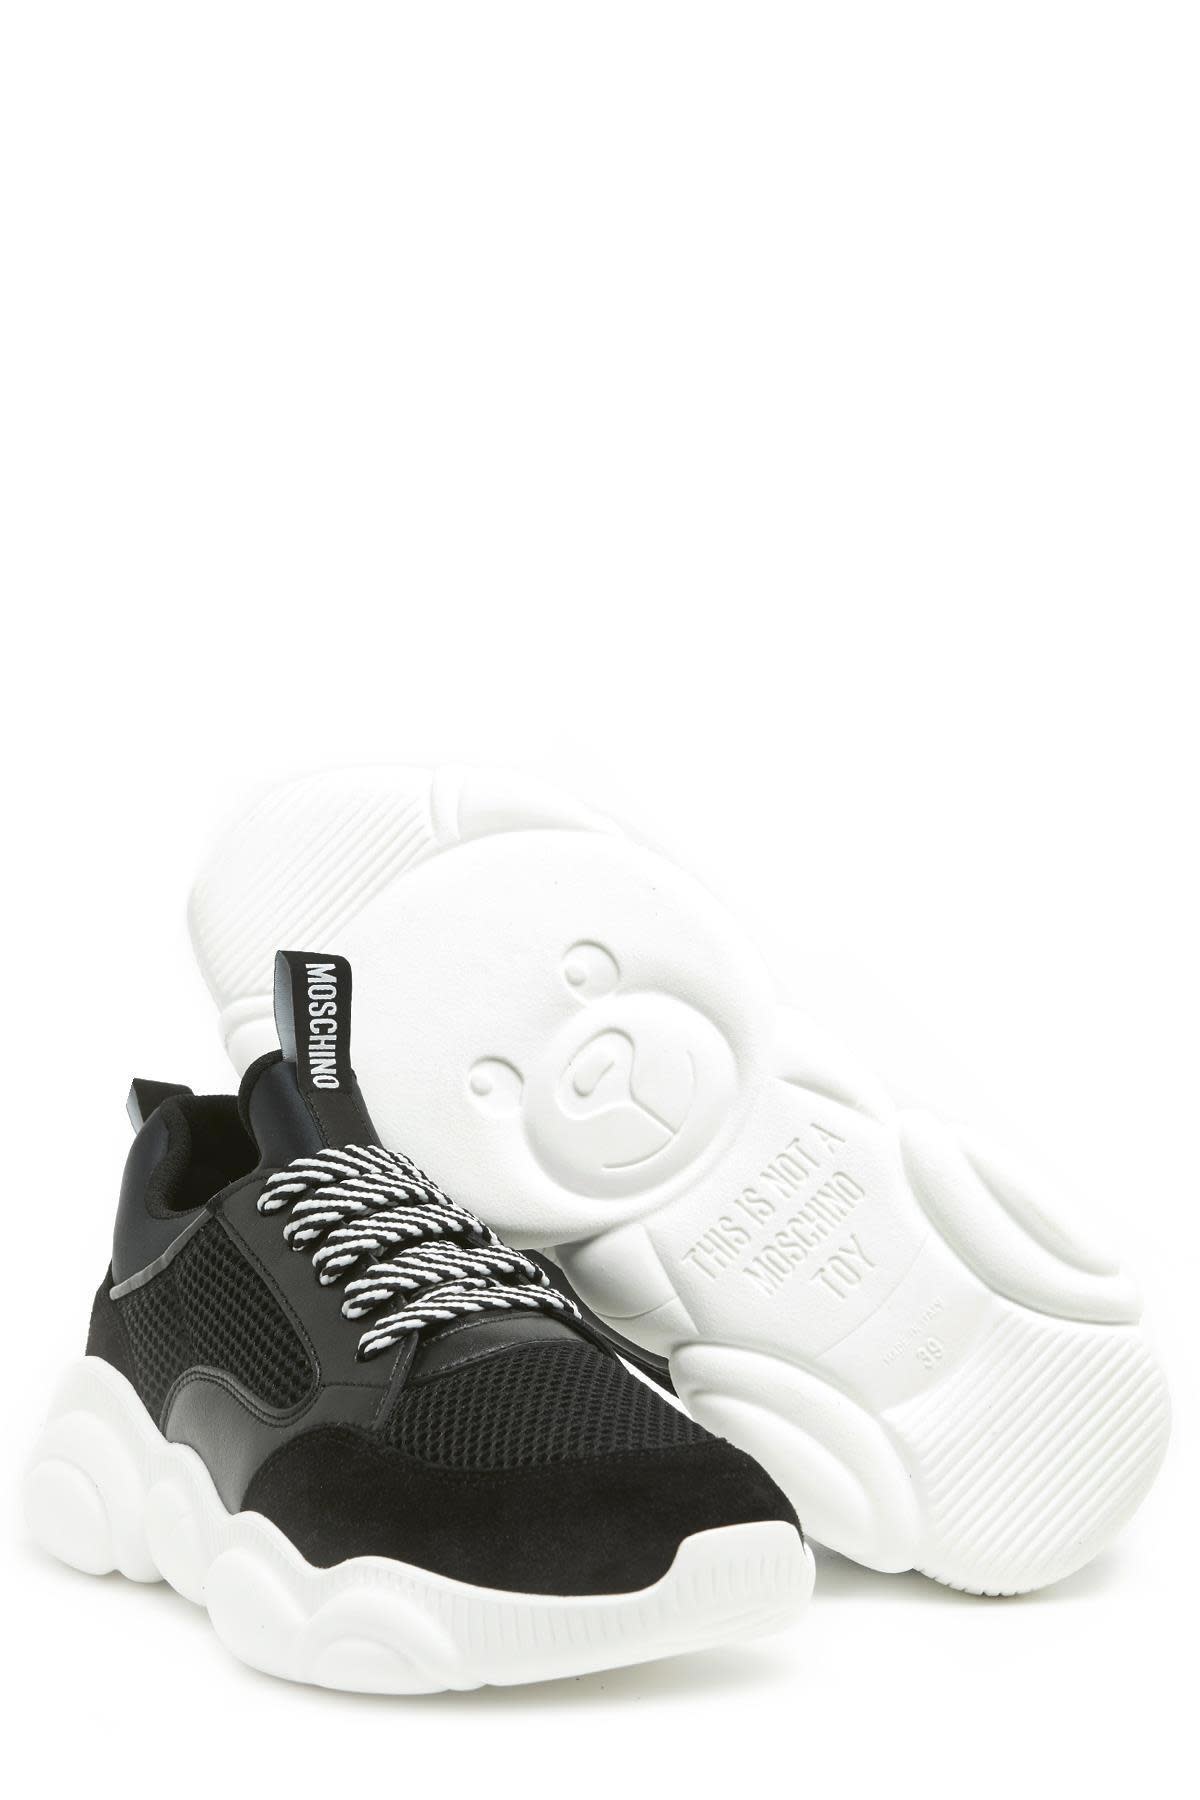 moschino toy sneakers